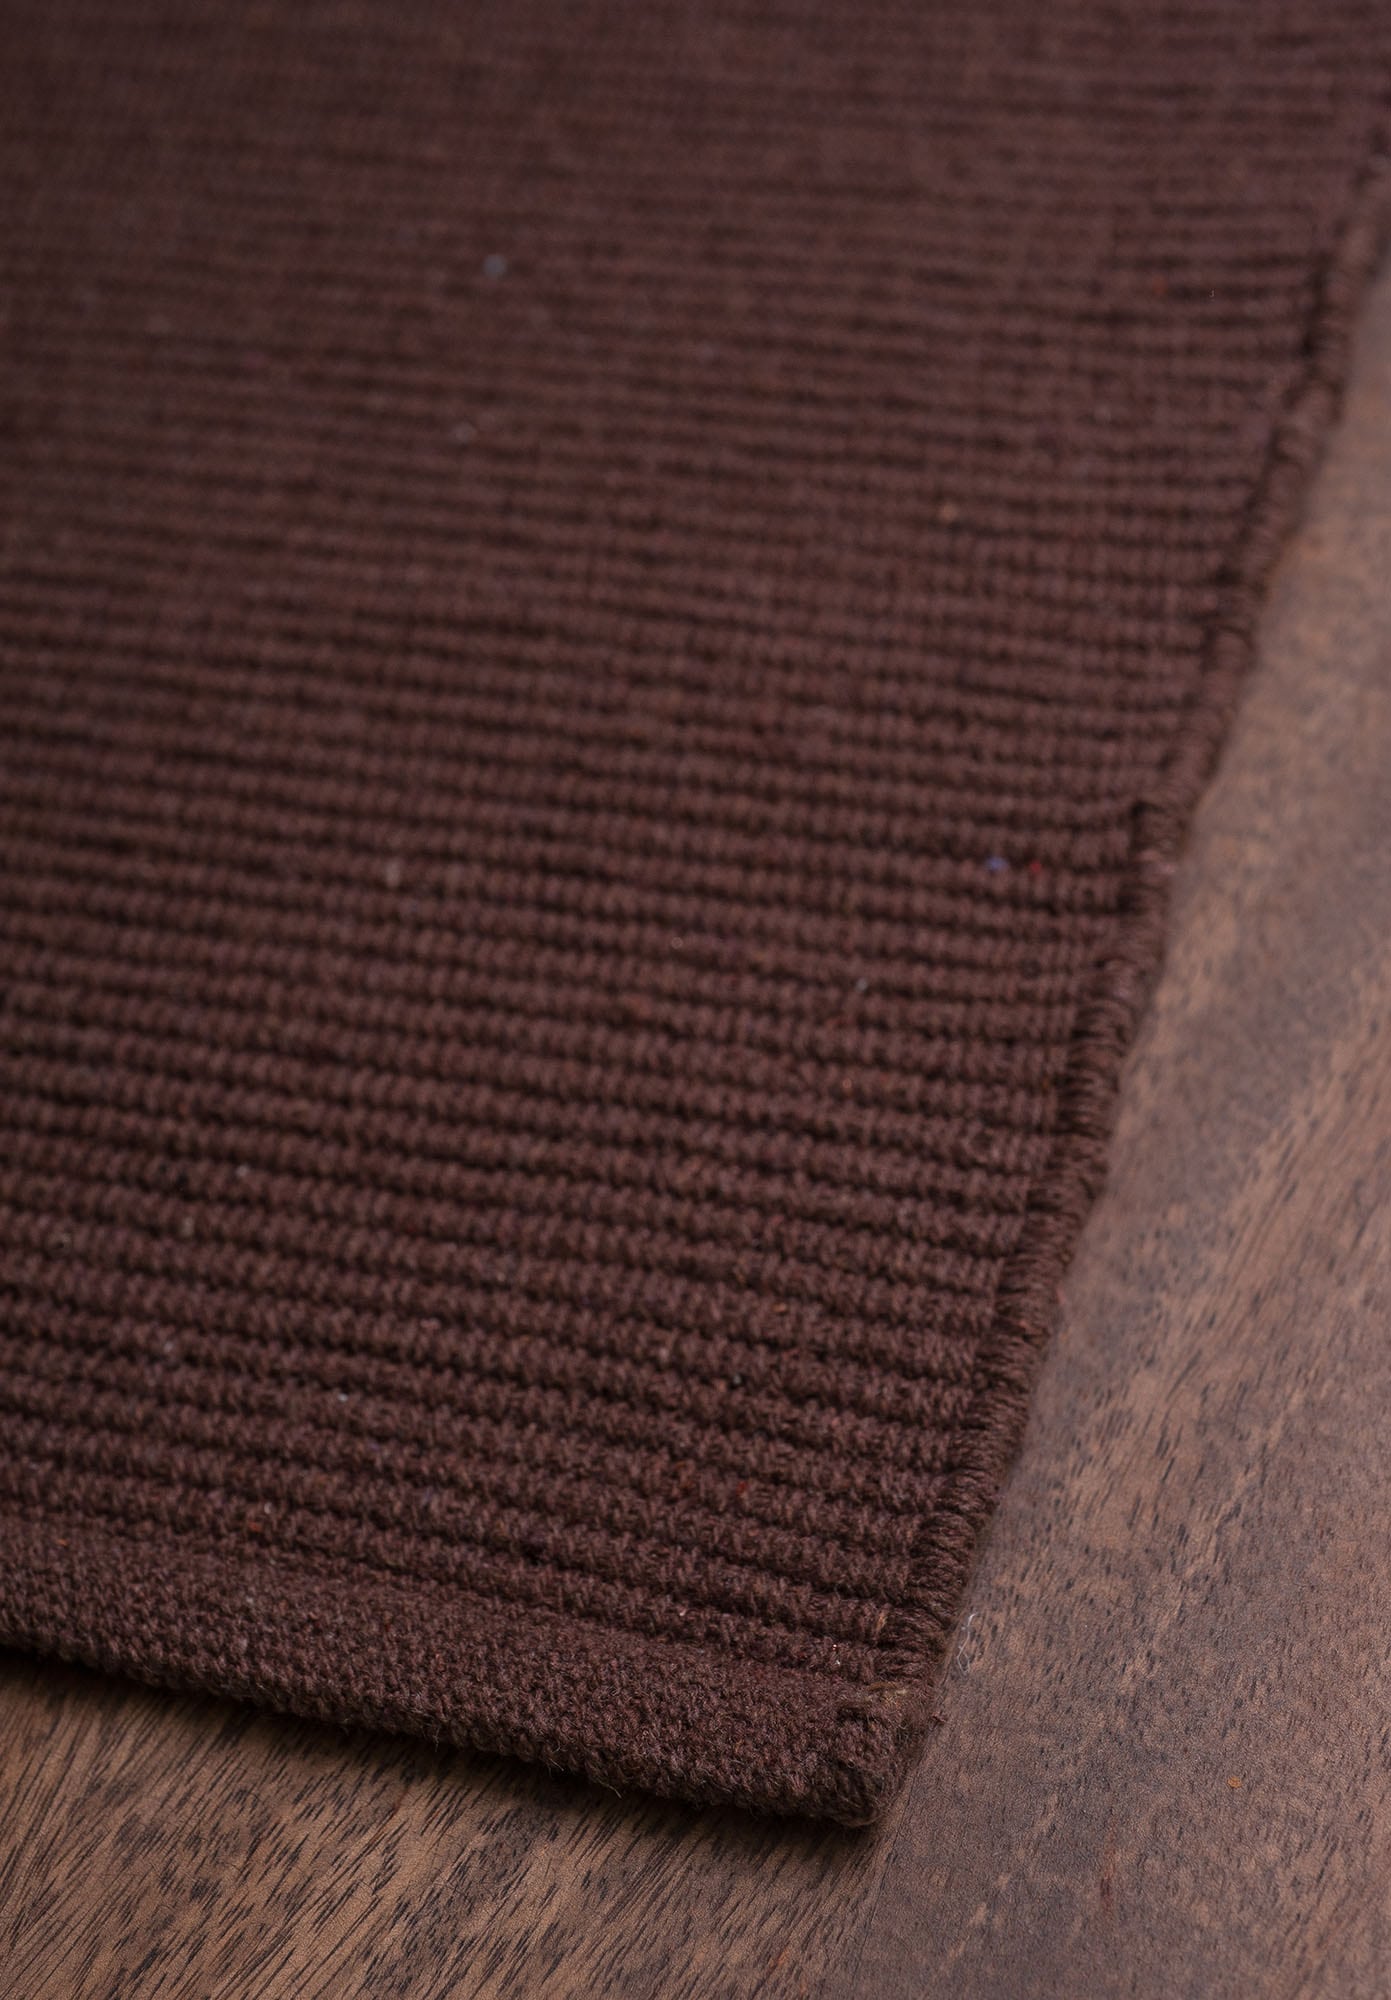 Rich, textured, handwoven, chocolate brown, 100% cotton natural